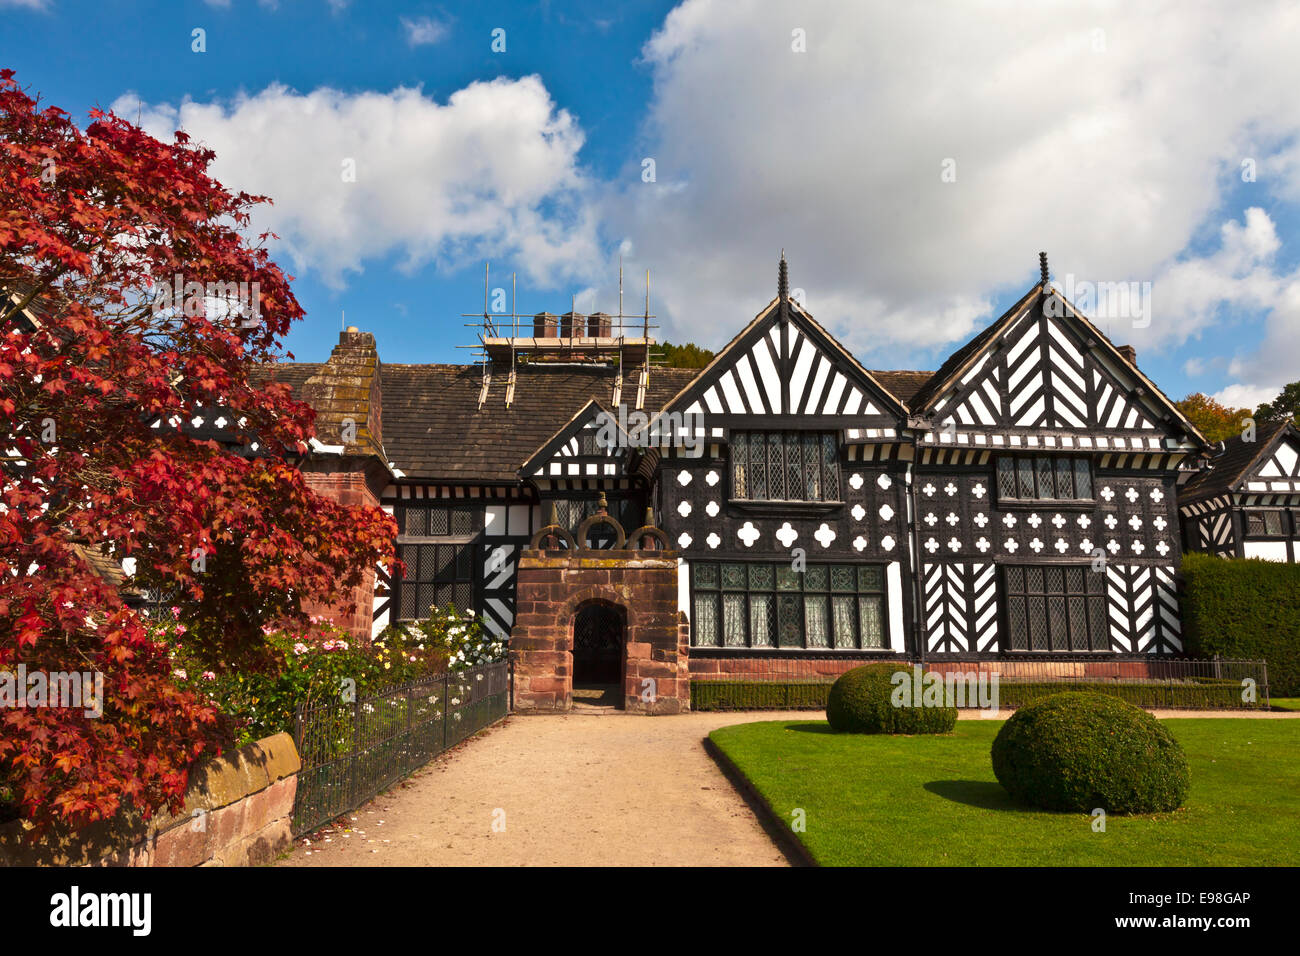 Black and white timber framed medieval mansion house and gardens. Stock Photo